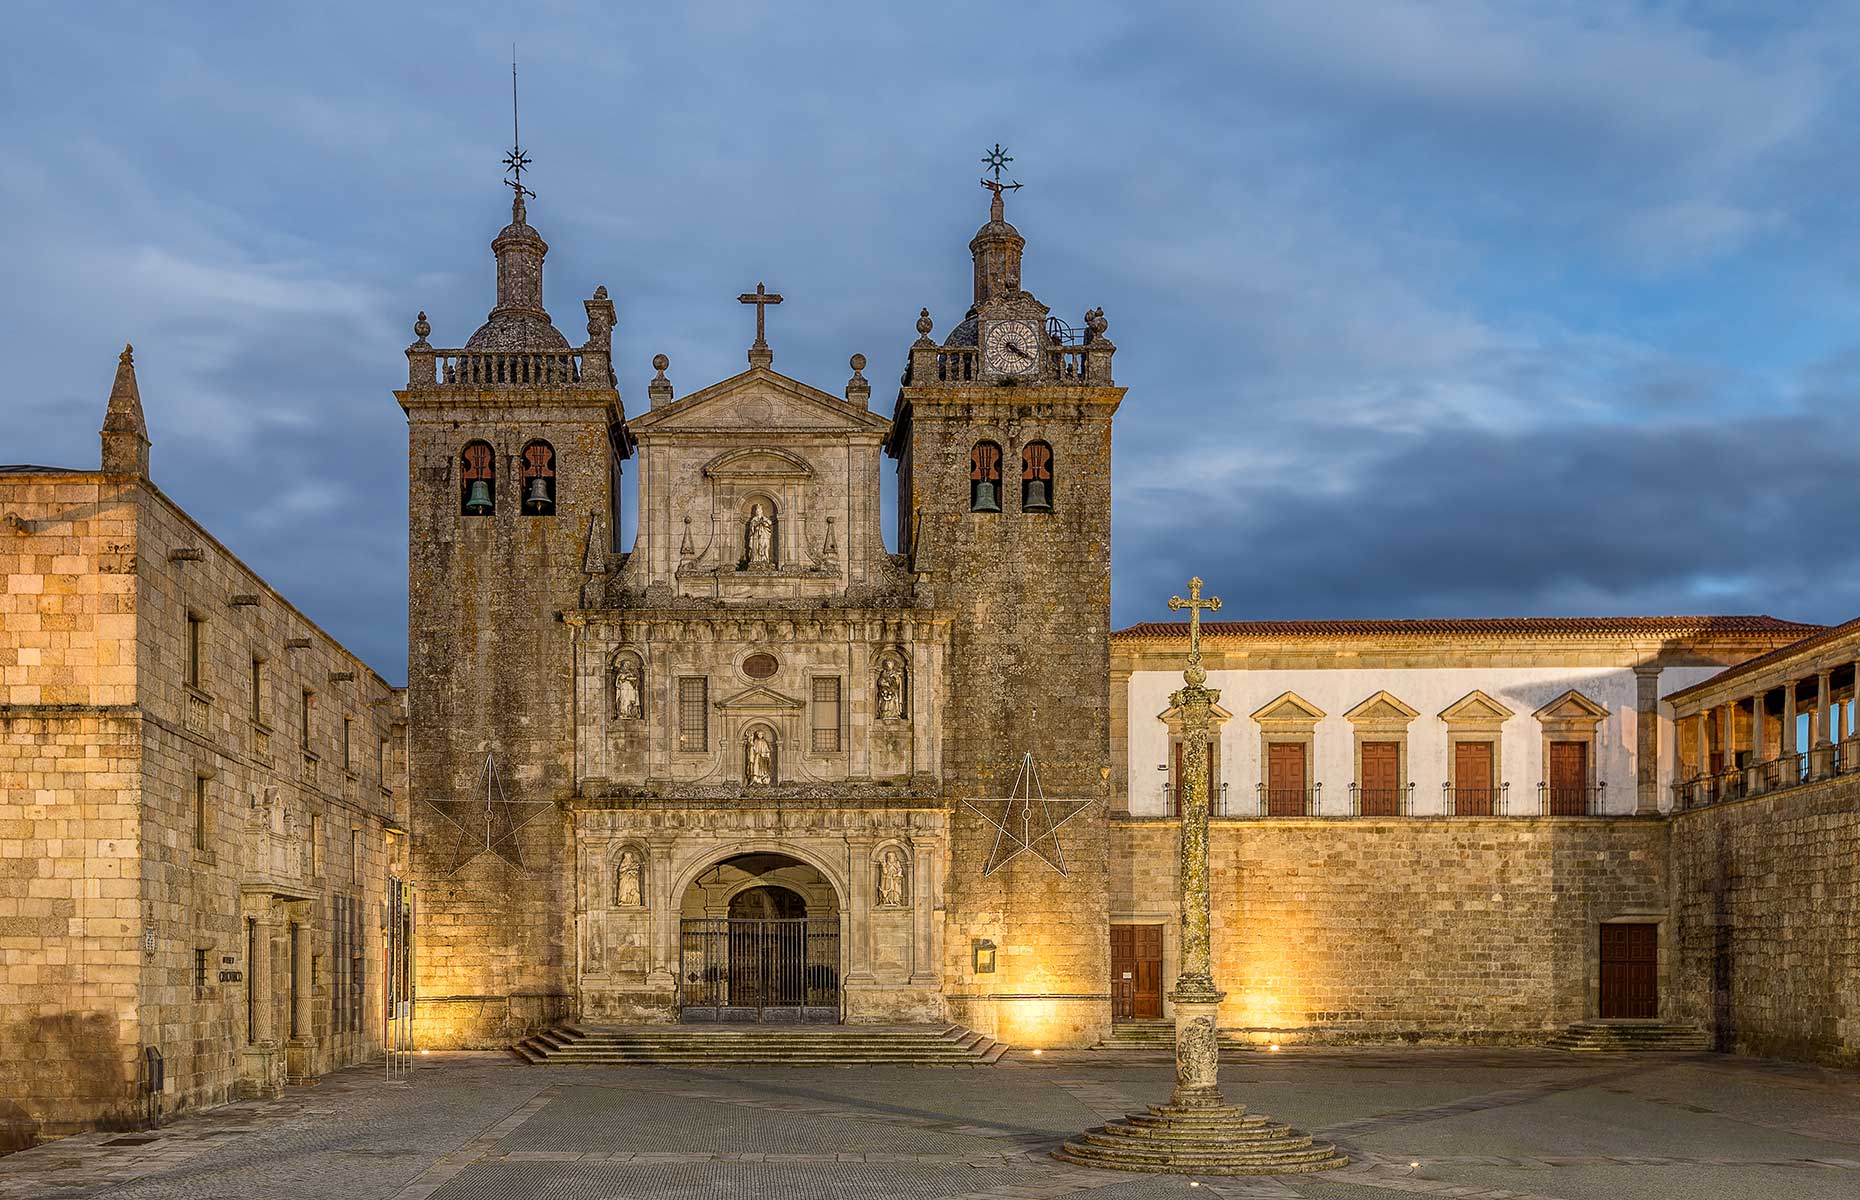 Viseu's 12th century cathedral